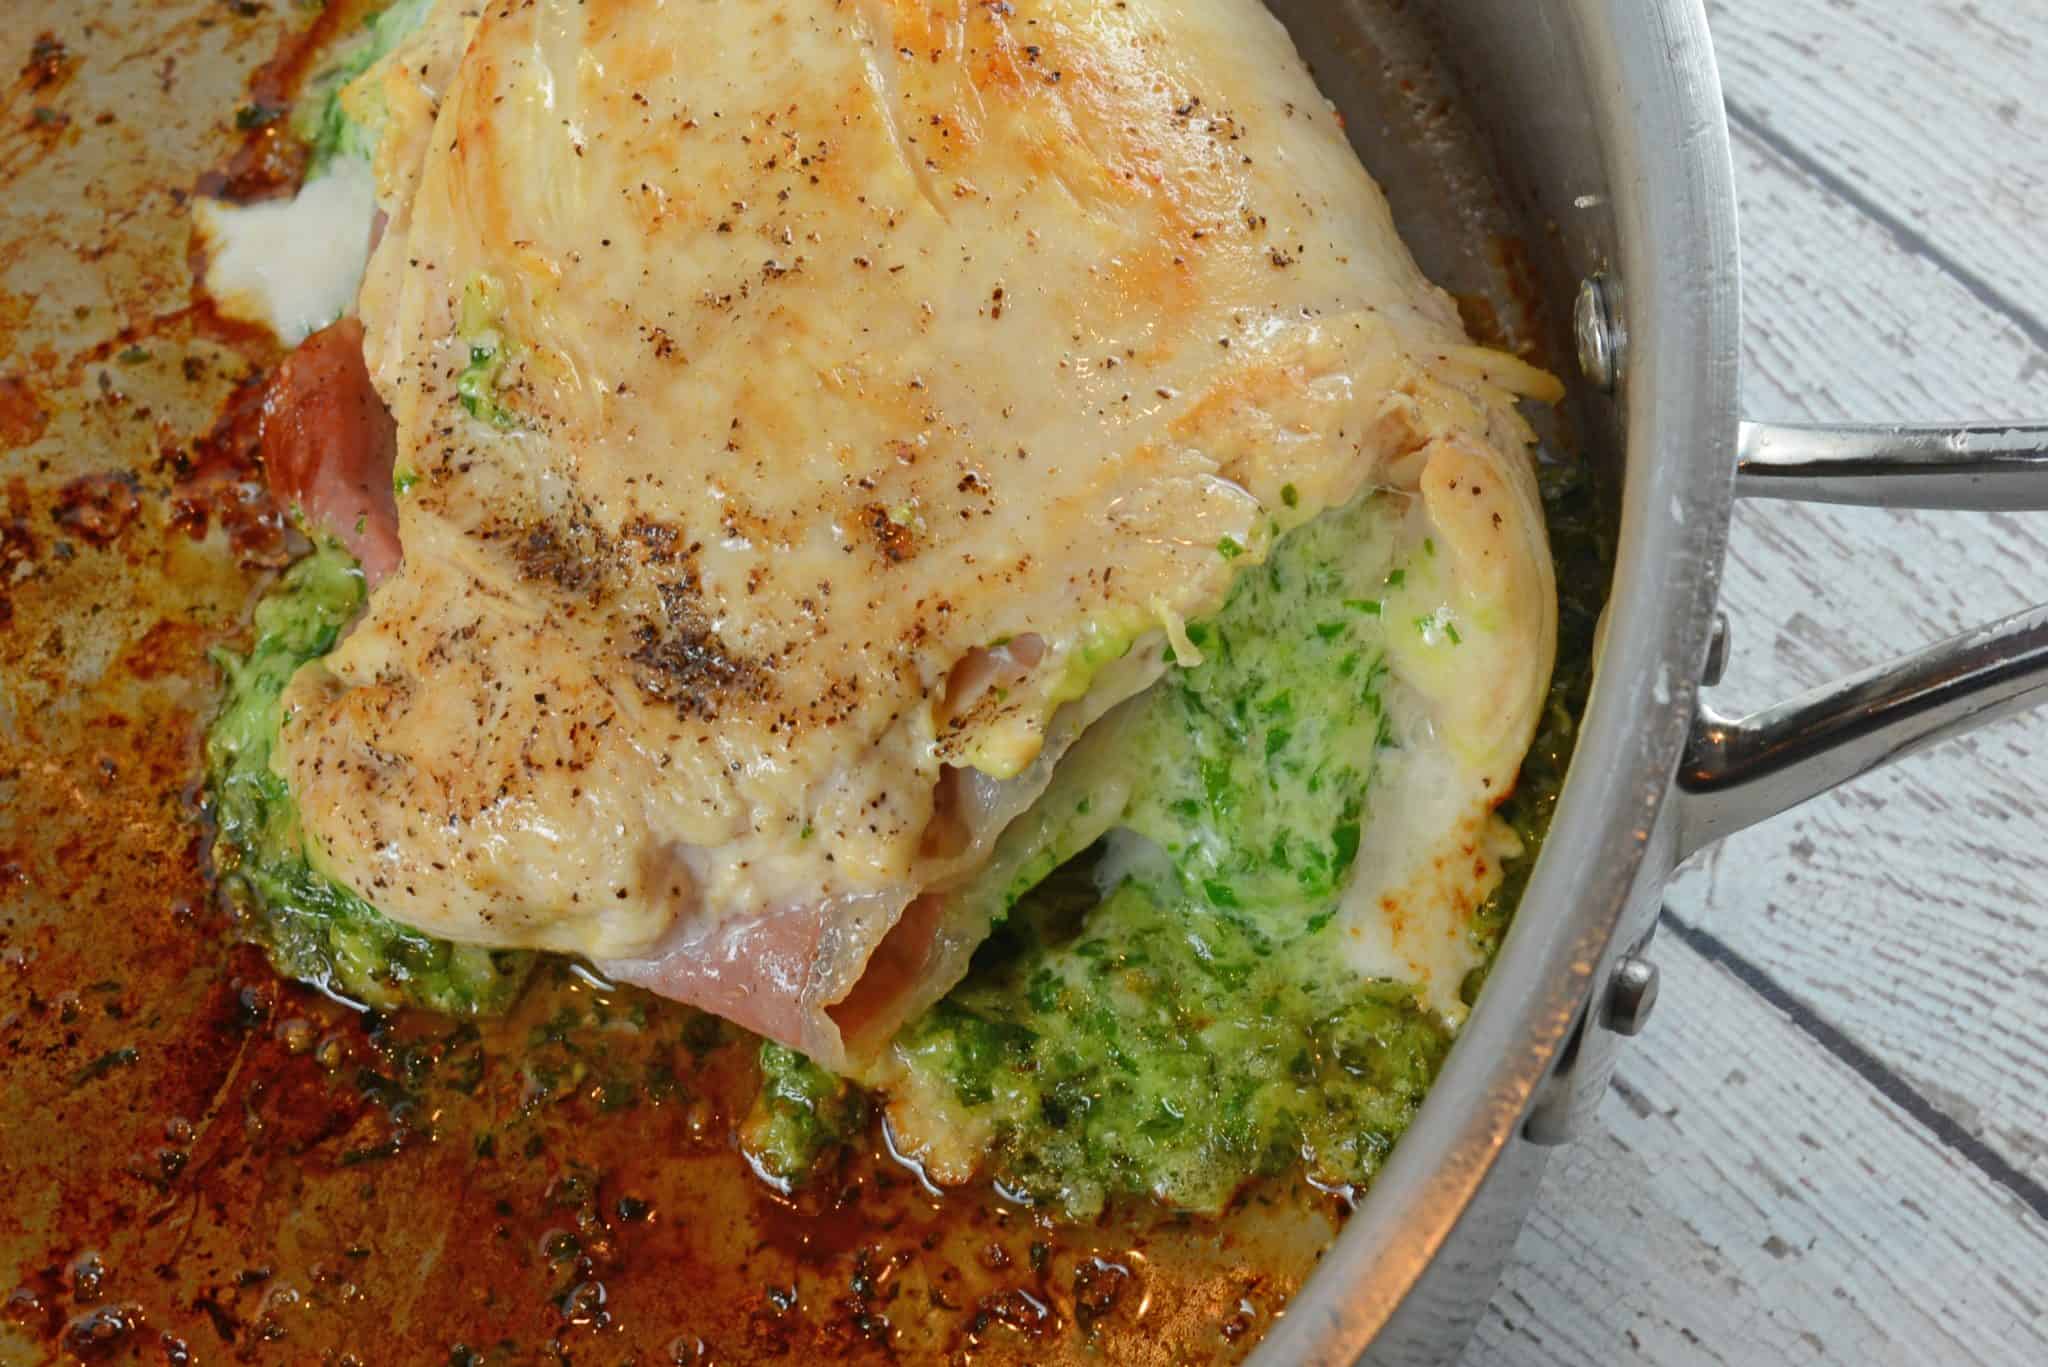 Gruyere and Prosciutto Stuffed Chicken is topped off with a silky tomato and shallot sauce. While this looks like a restaurant caliber meal, it only takes about 1 hour!